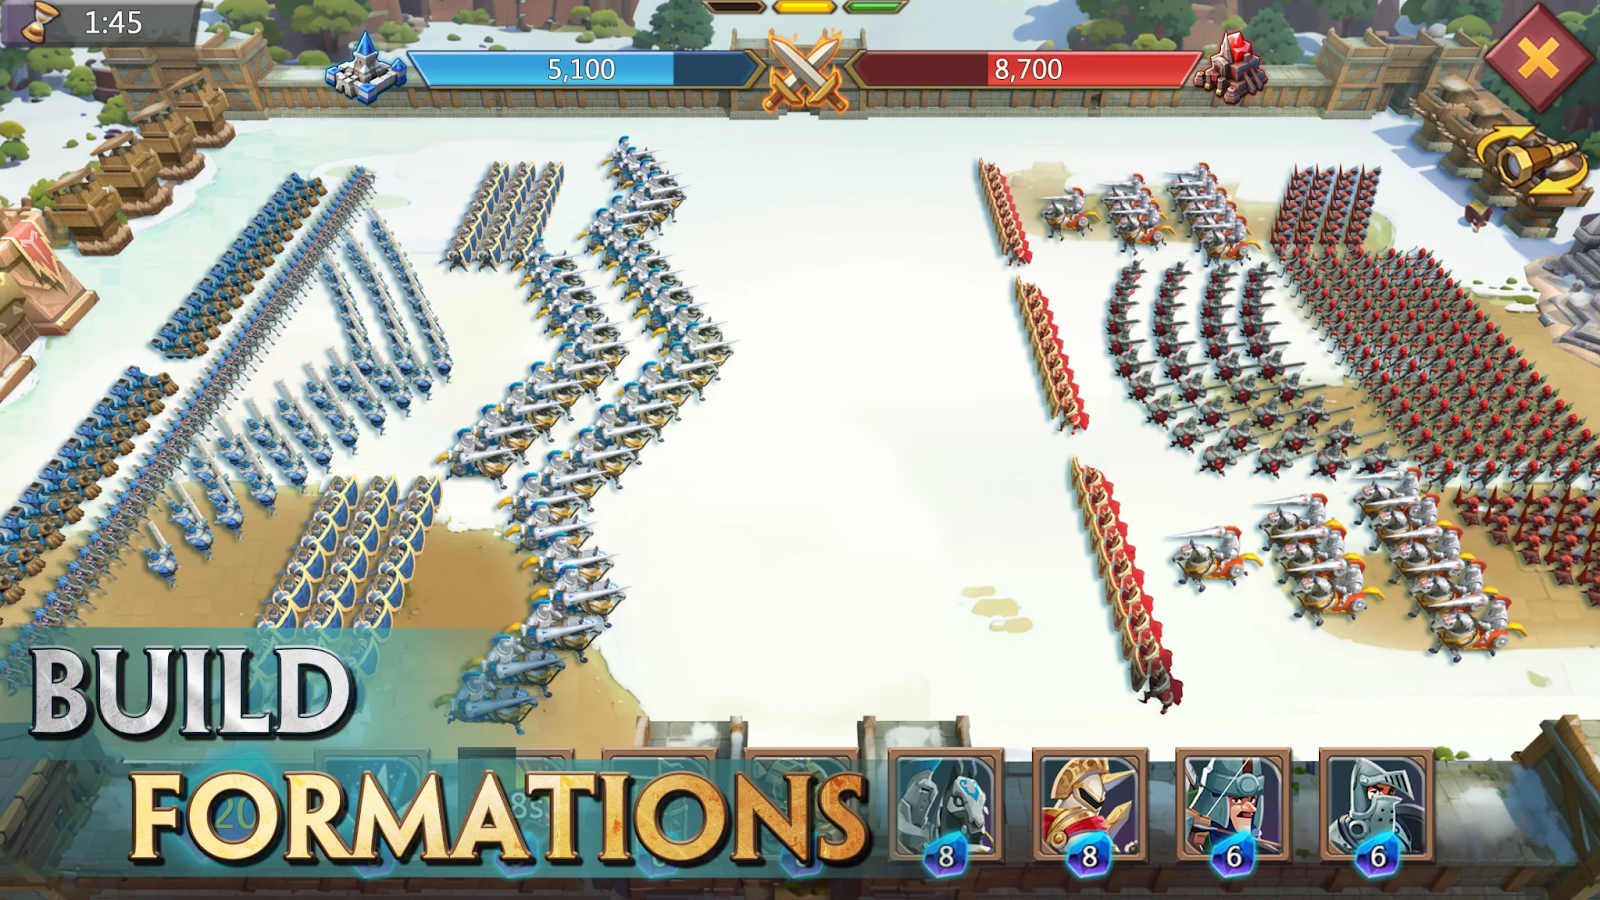 Formations are the most important thing in this strategy game